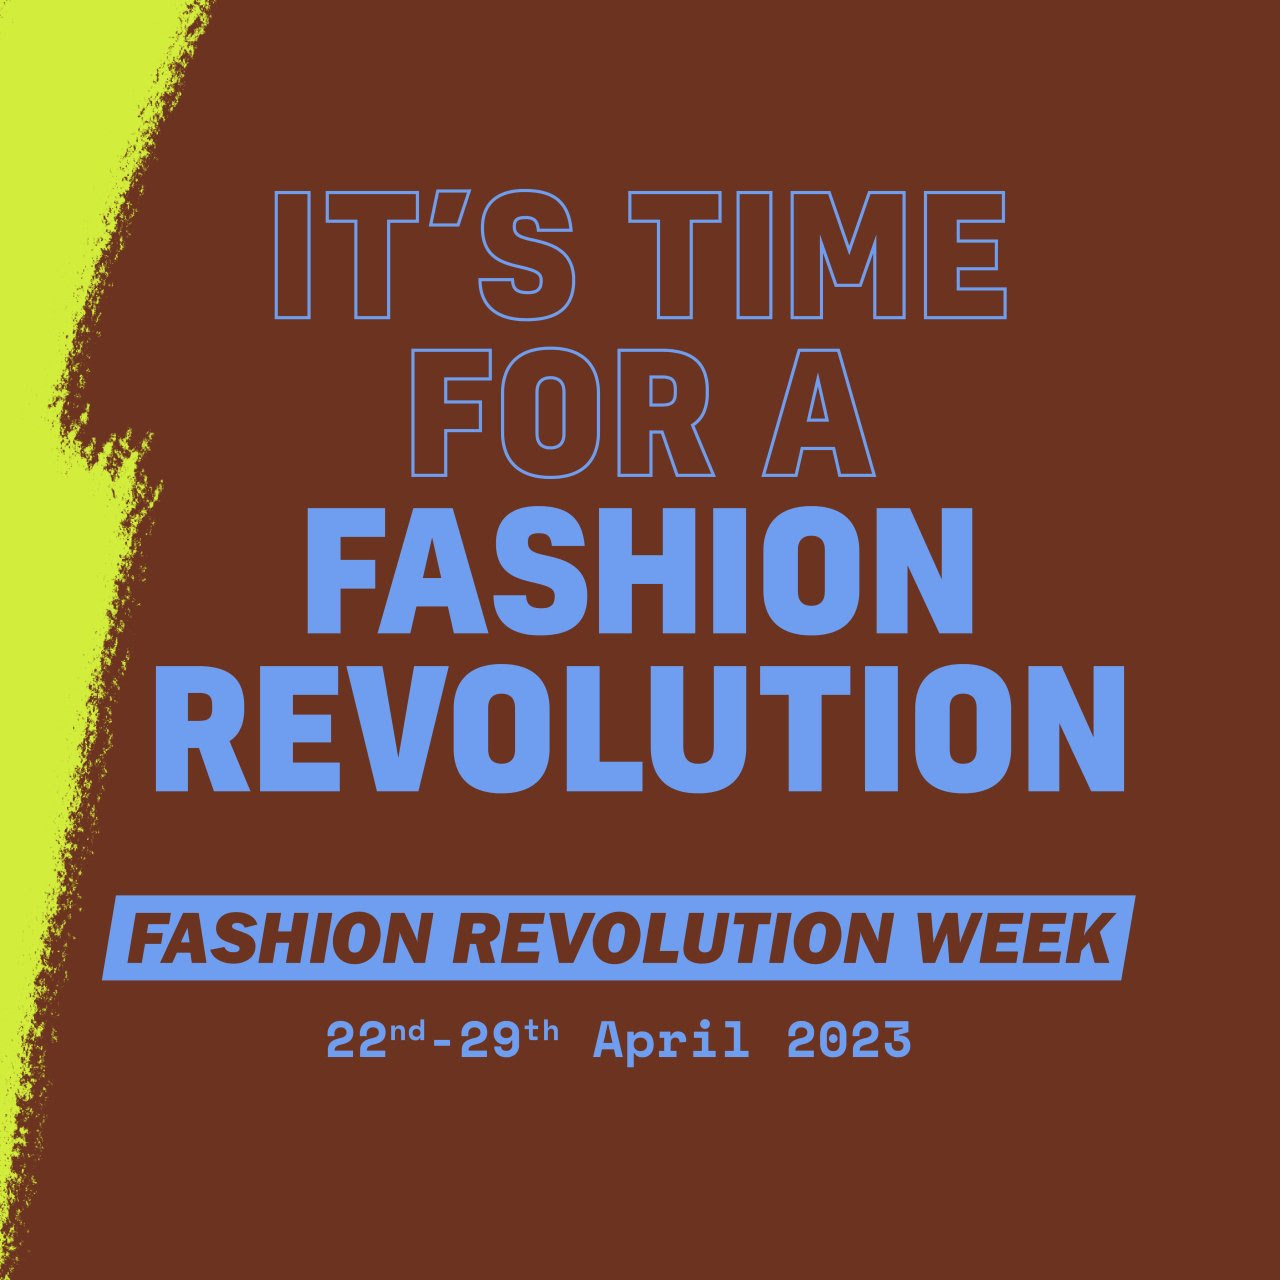 It's time for a fashion revolution